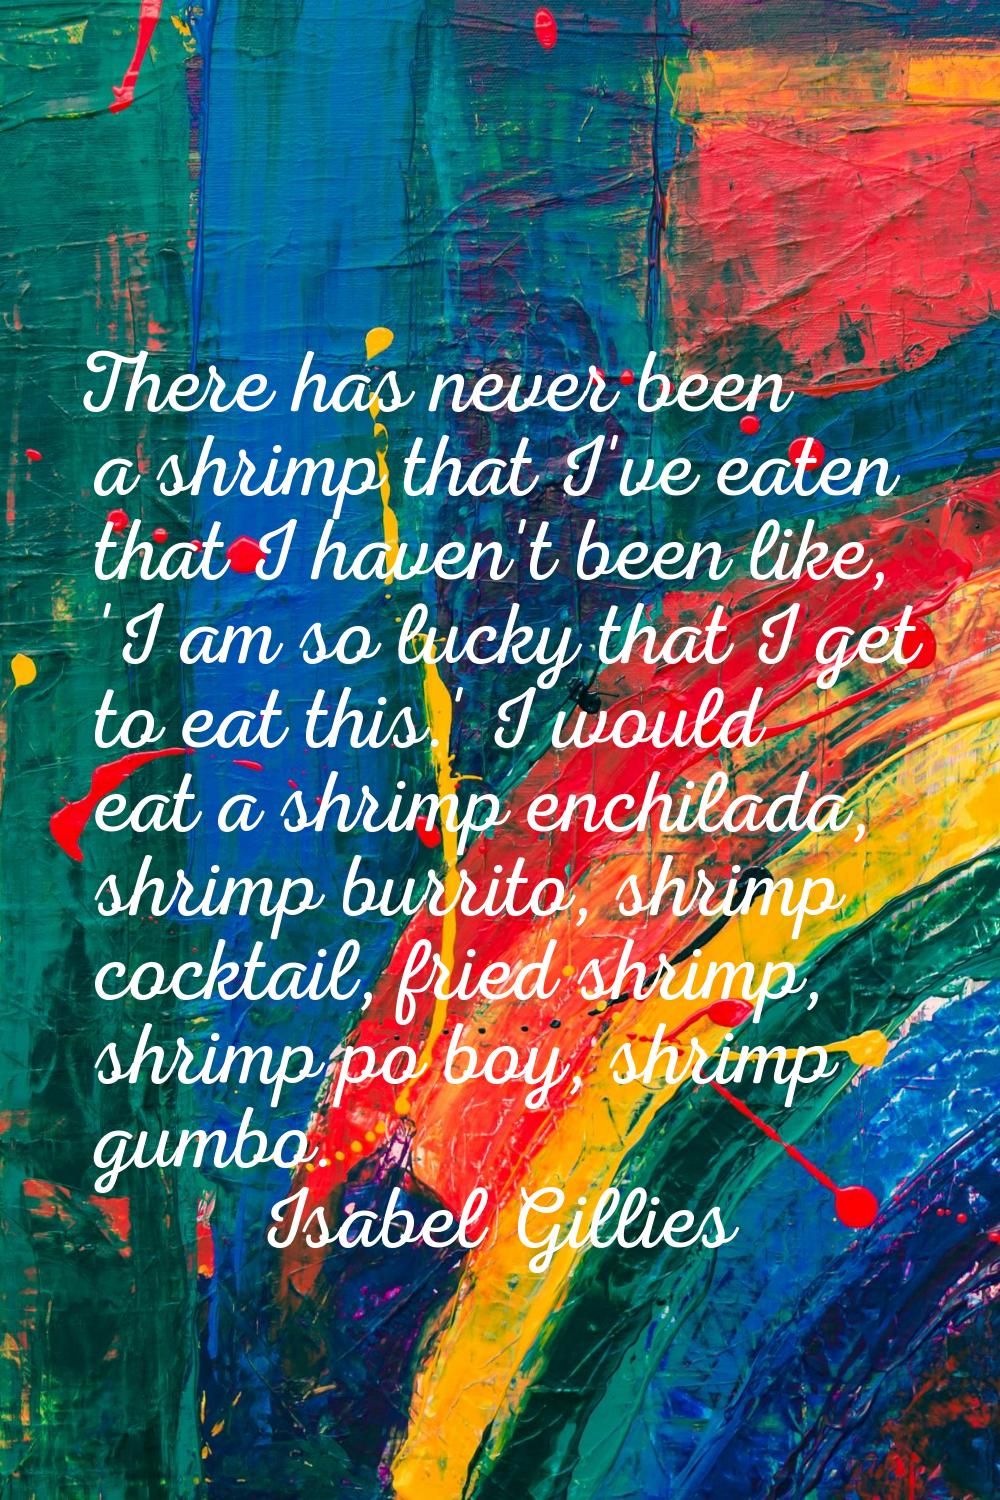 There has never been a shrimp that I've eaten that I haven't been like, 'I am so lucky that I get t